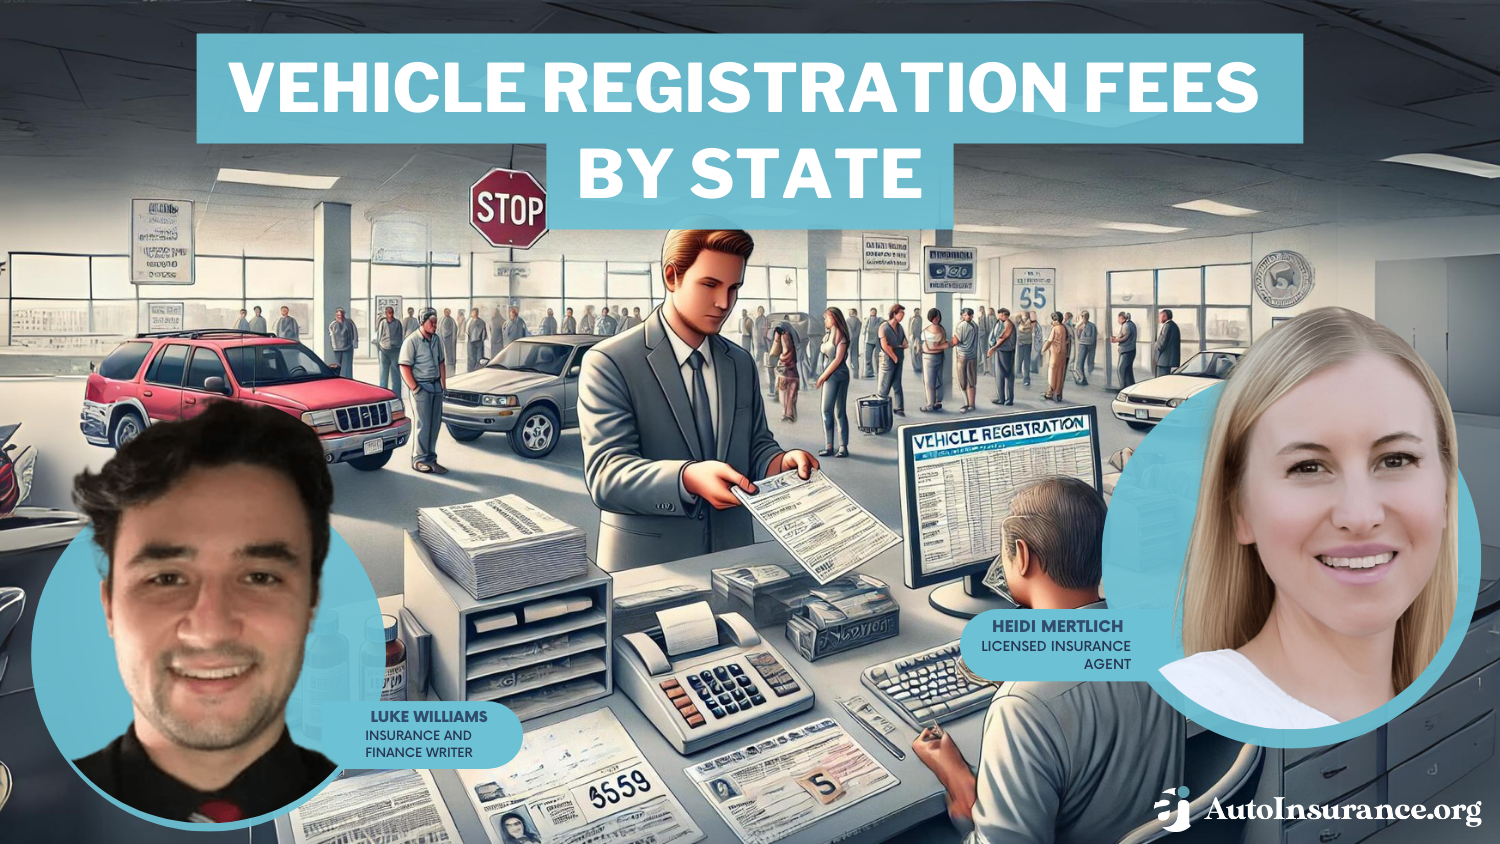 Vehicle Registration Fees by State